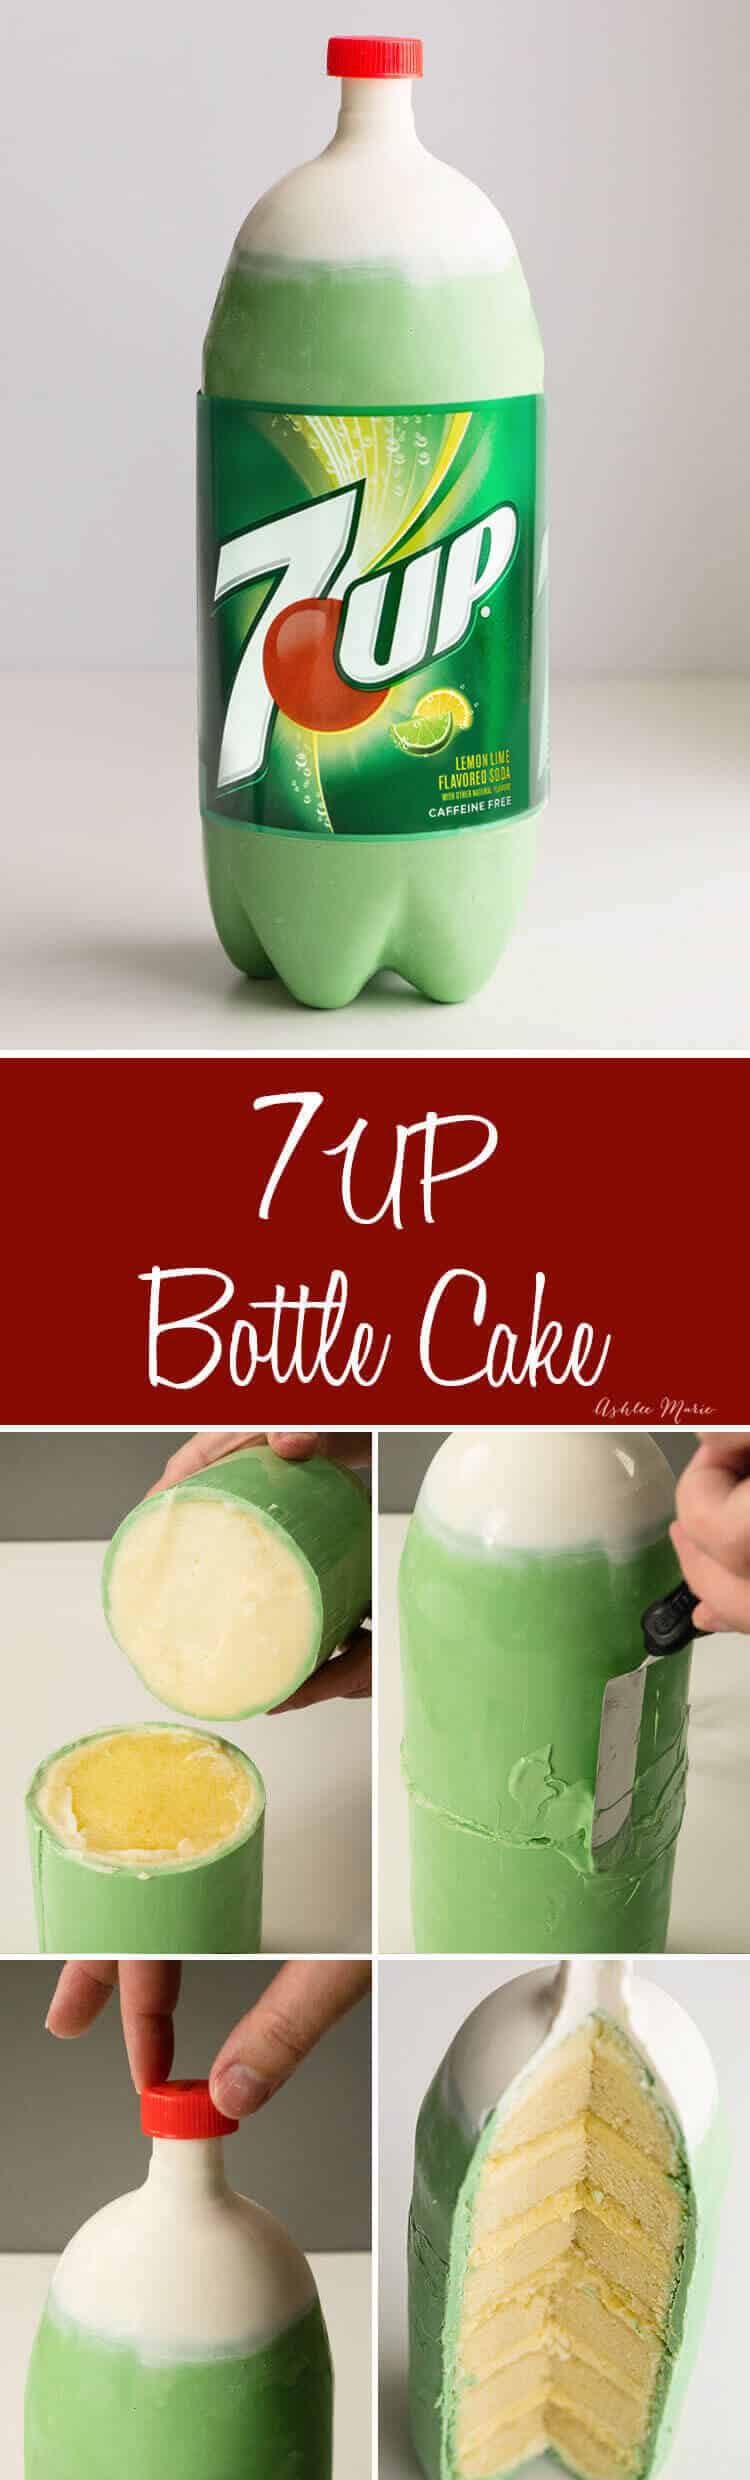 a full tutorial for making your own 7UP soda bottle cake! recipes for the cake, mousse and frosting - all 7UP flavored